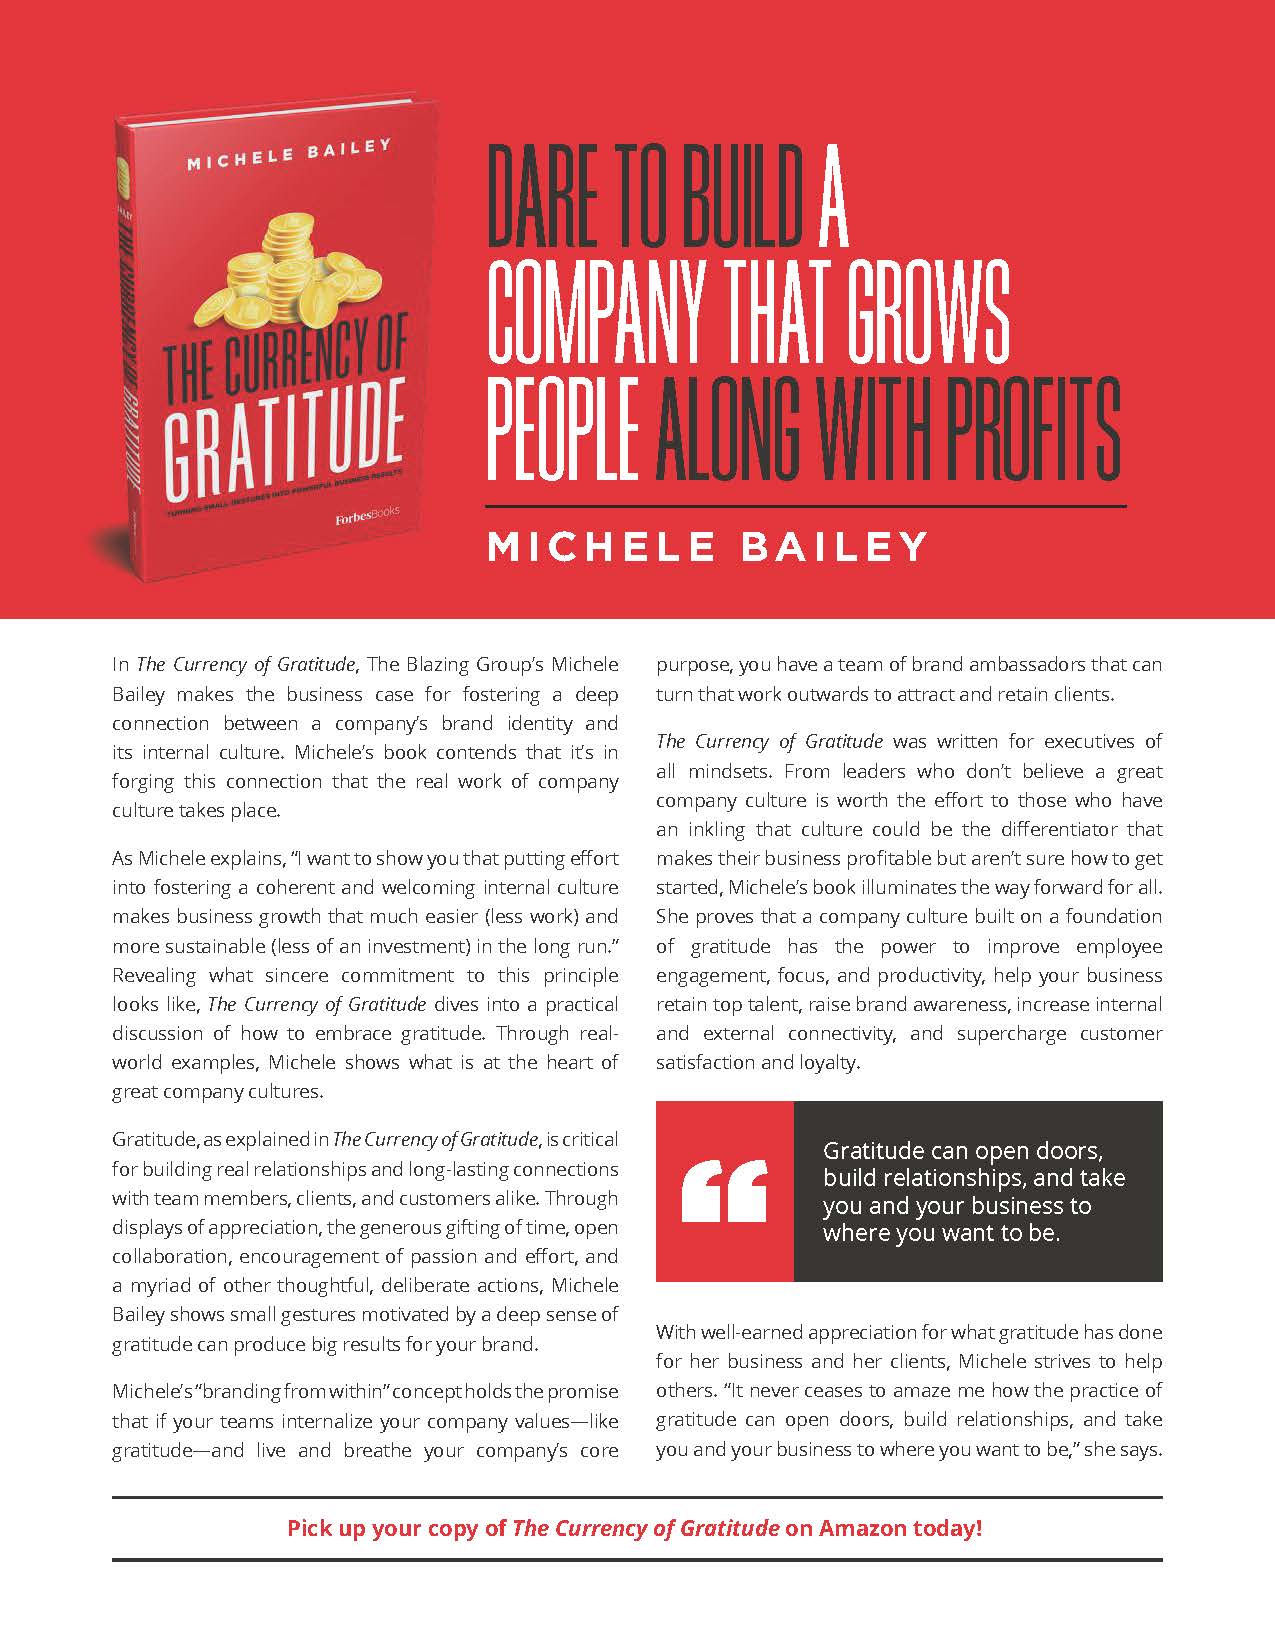 Michele Bailey 2 page book review